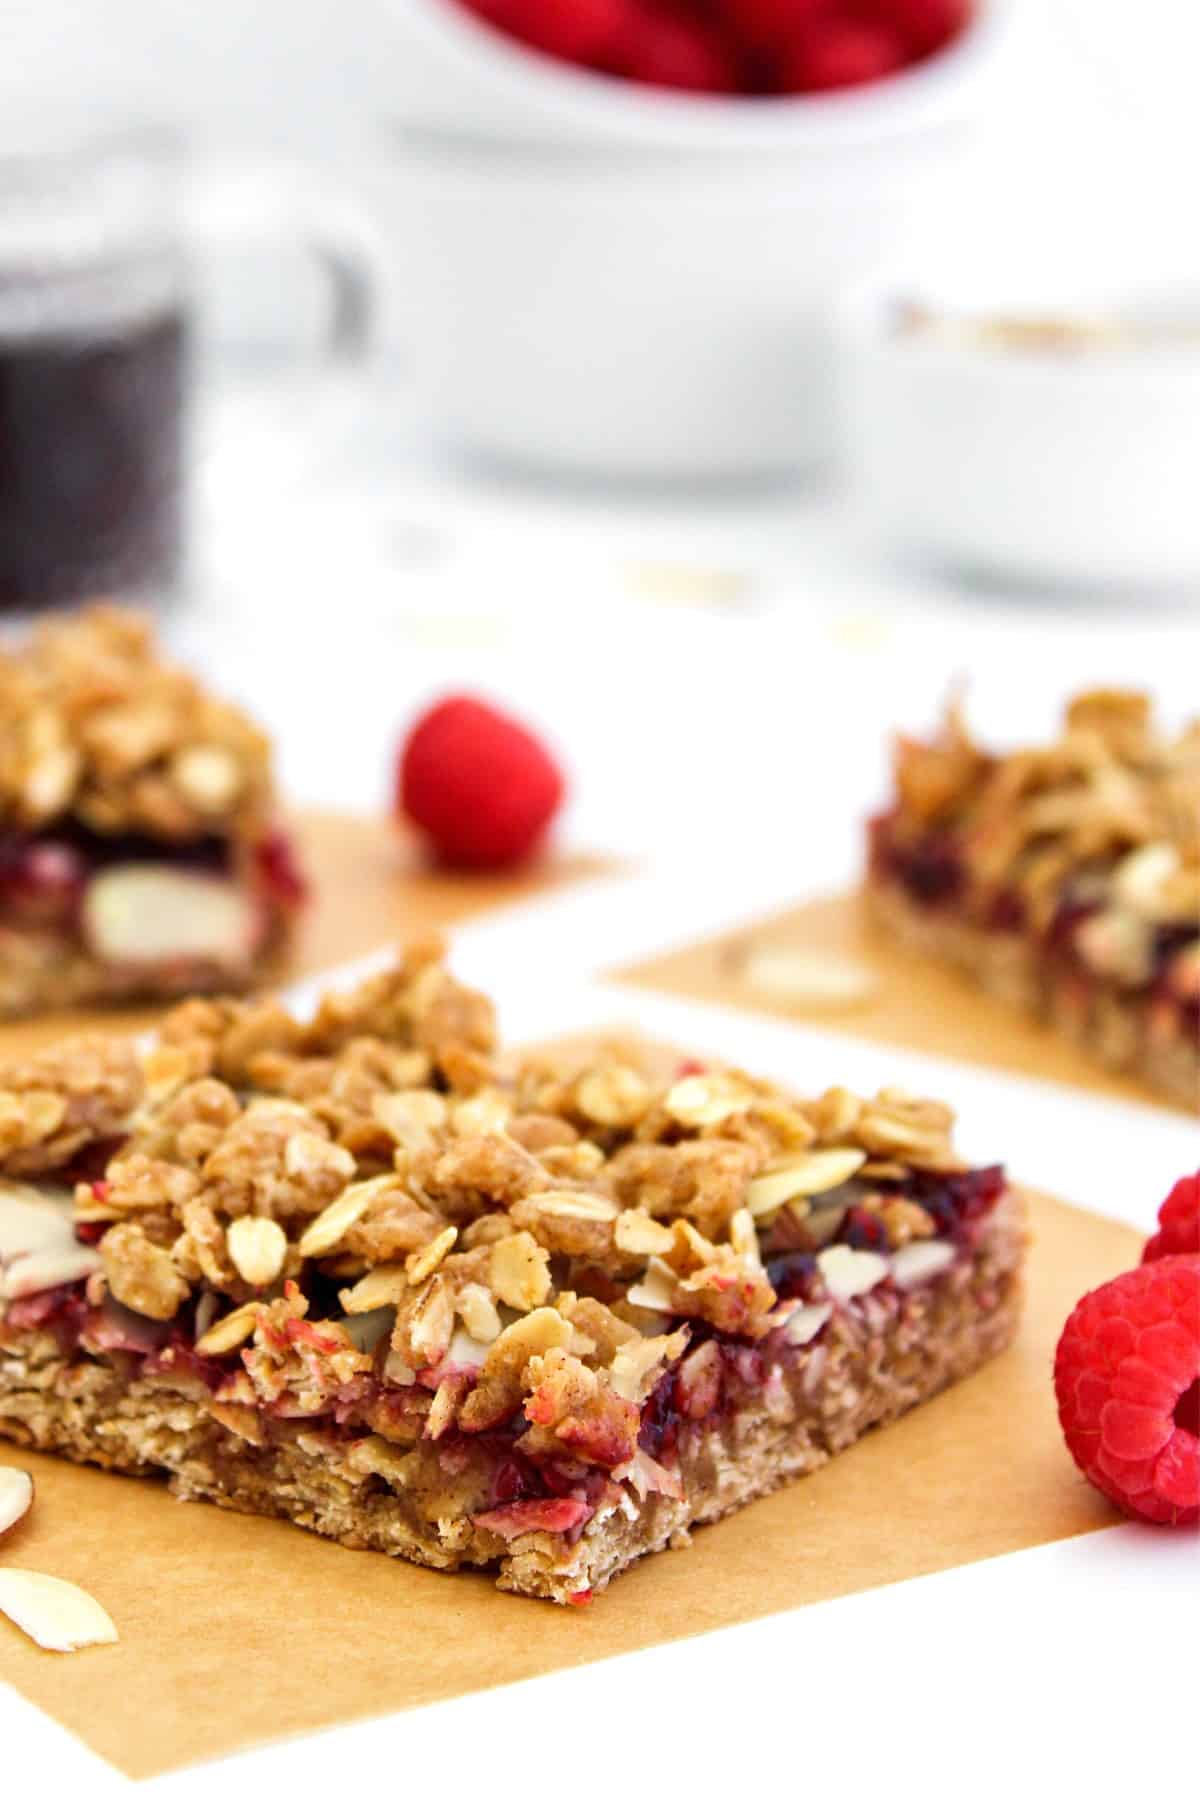 A portion of raspberry oatmeal bars on brown parchment paper.